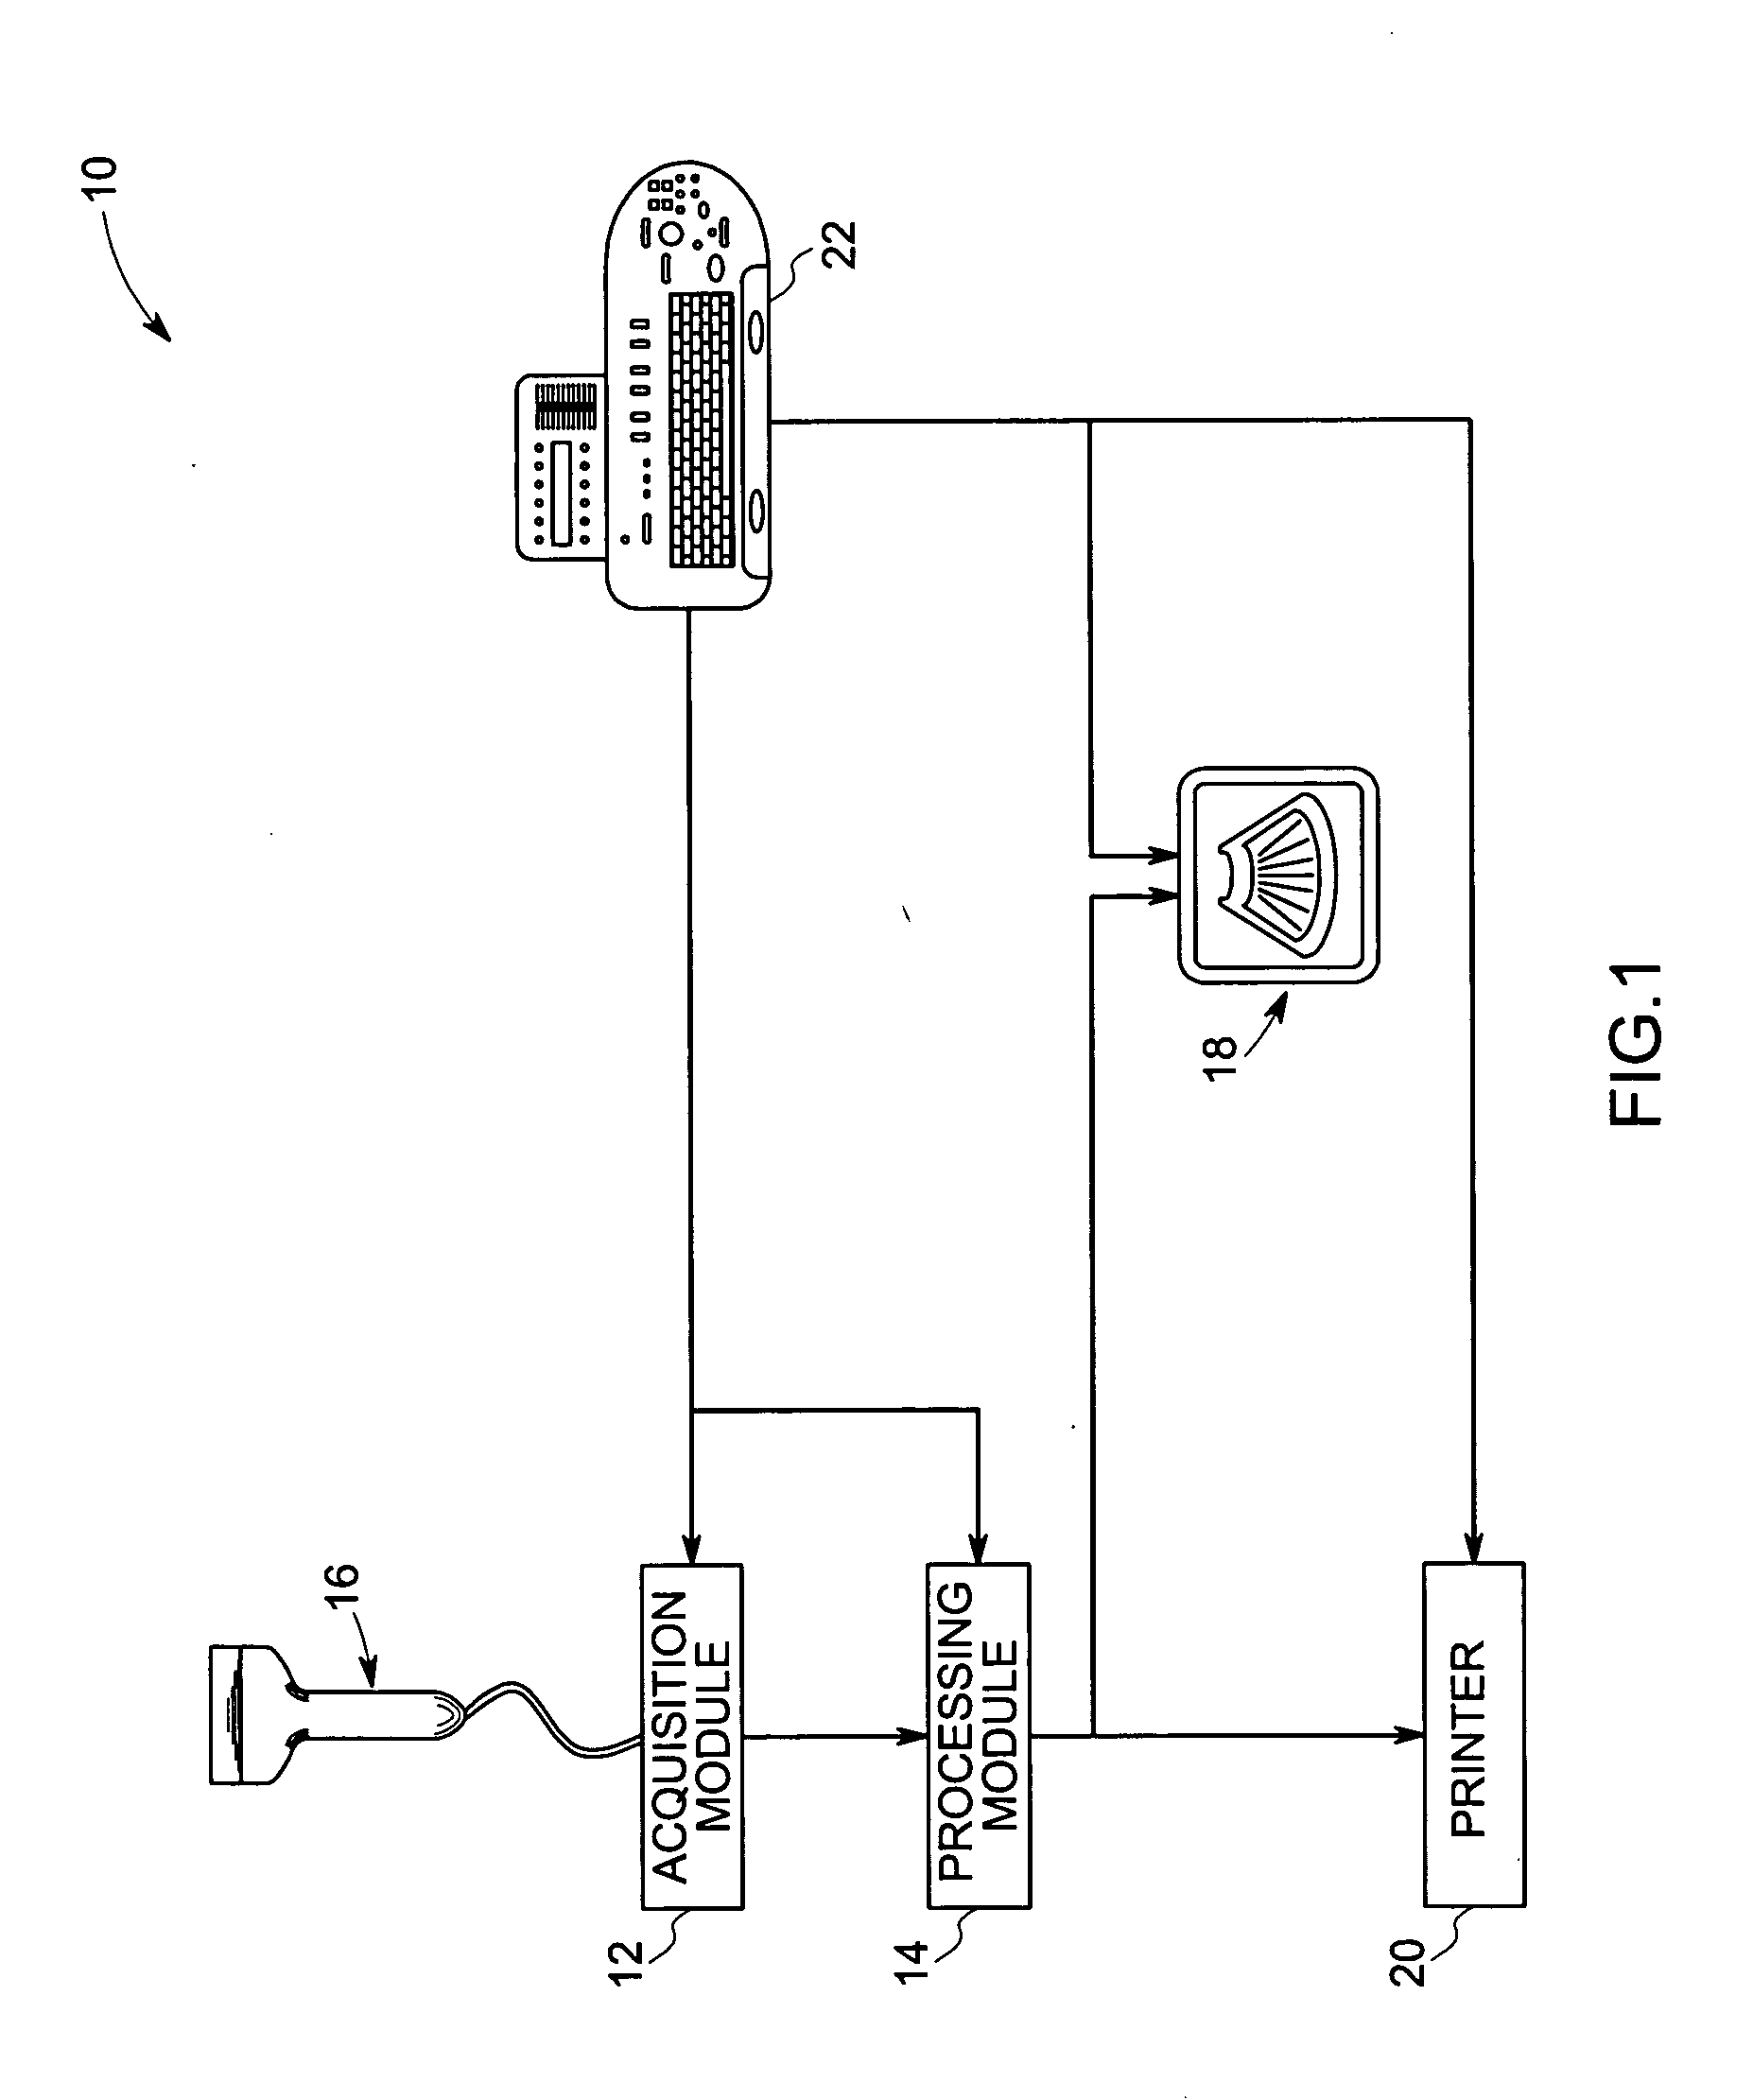 Ultrasound transducer with additional sensors